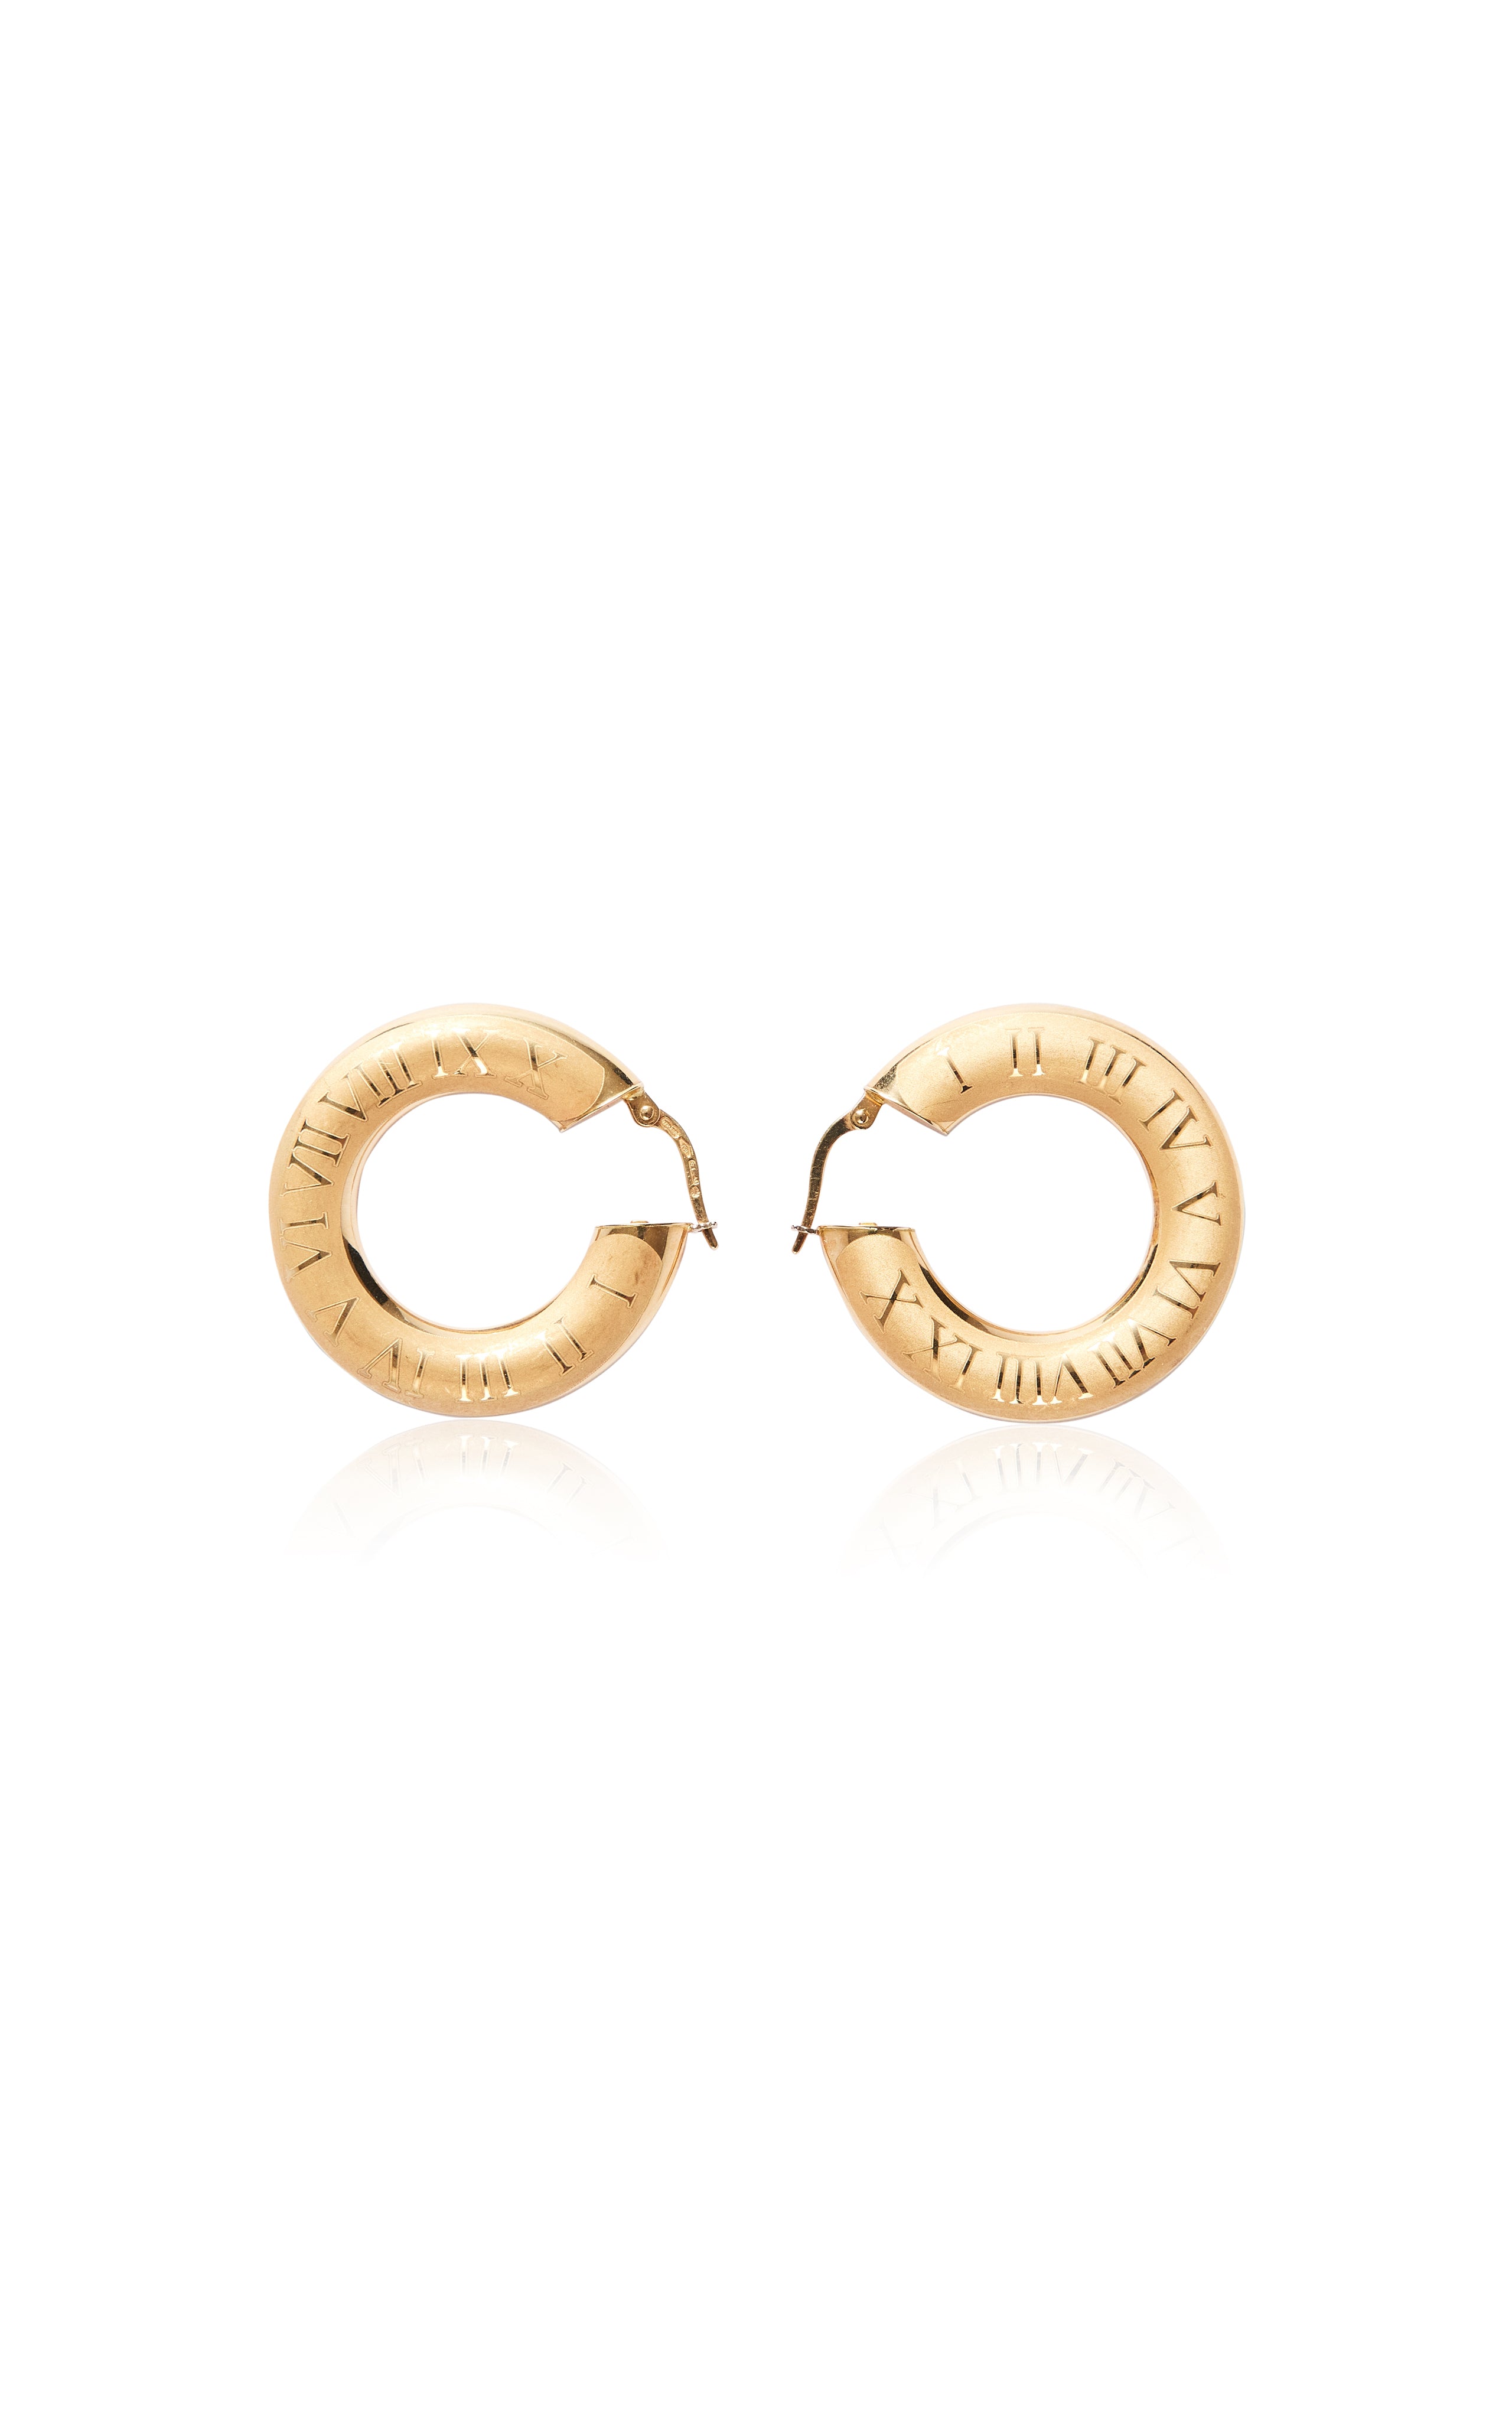 Vintage 18ct Gold Roman Numeral Earrings